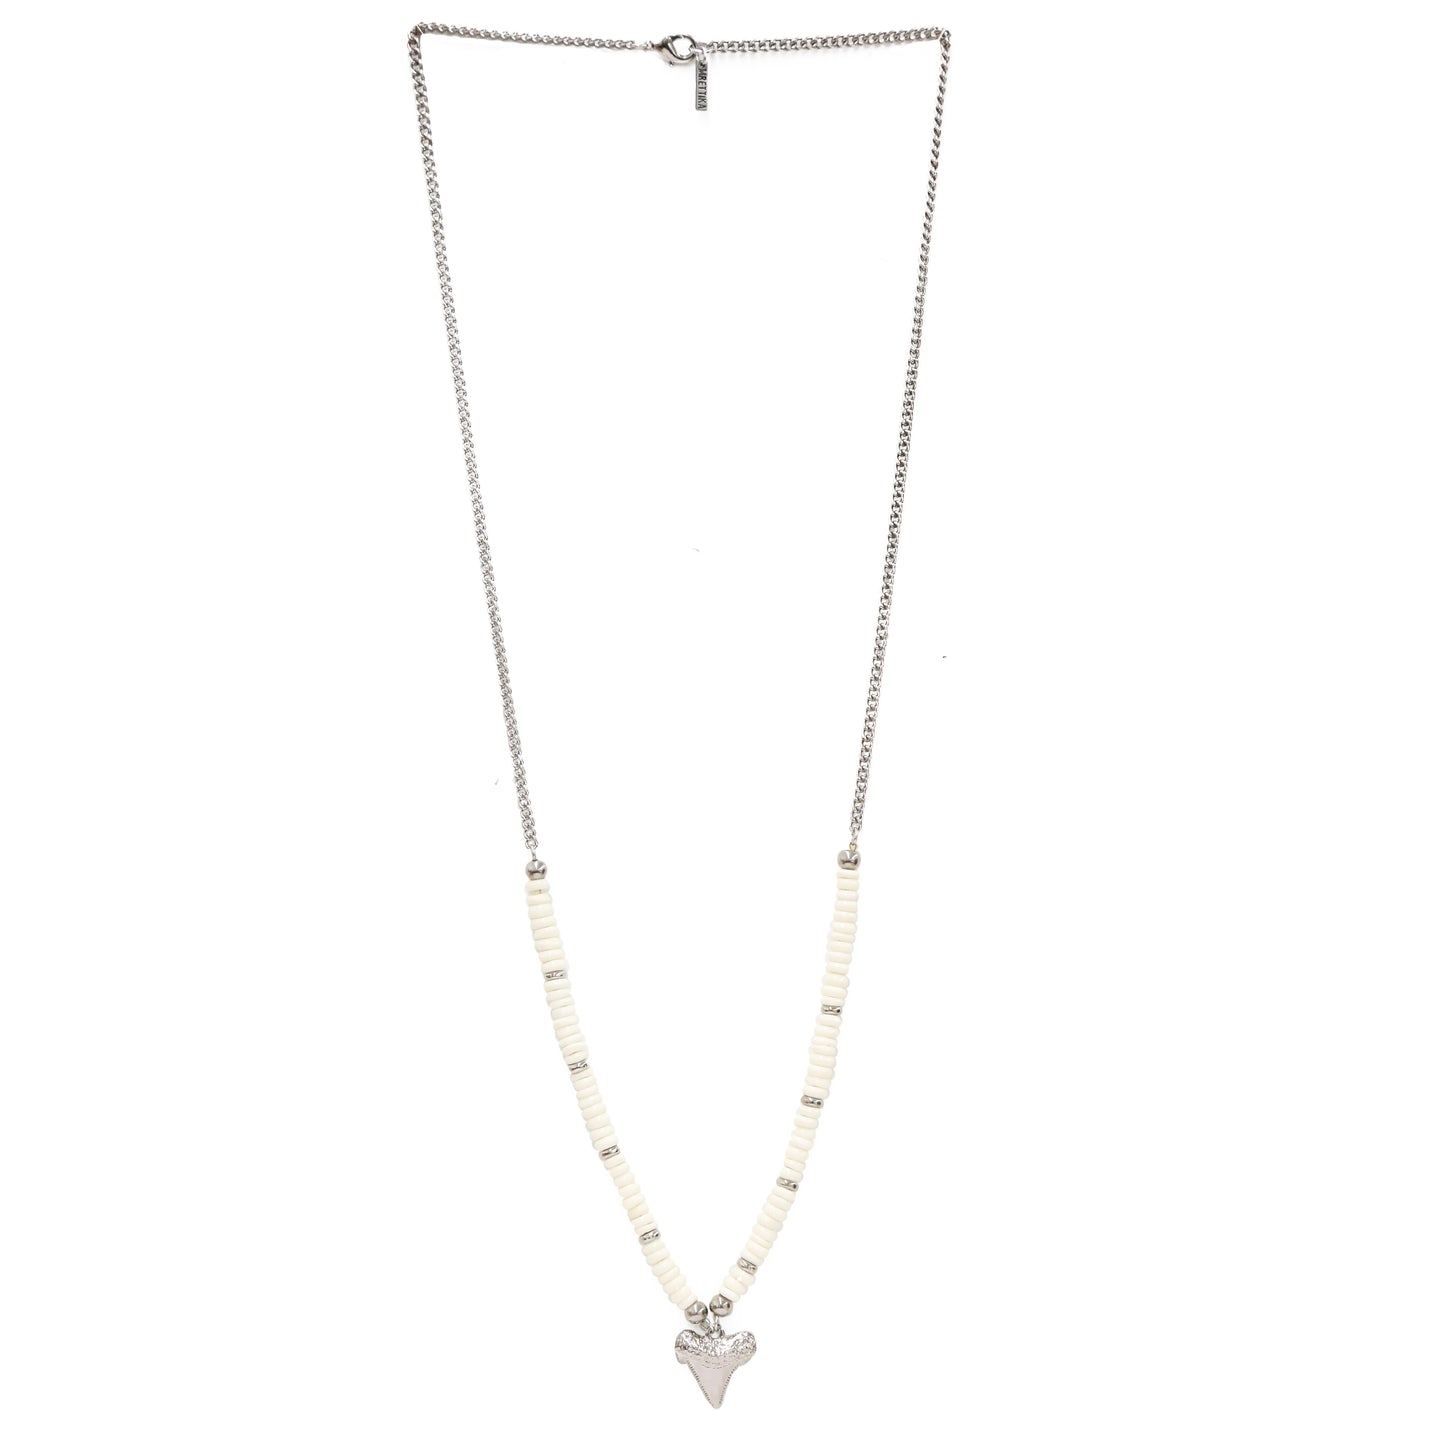 Depths of Tambora Necklace in White and Silver Ox